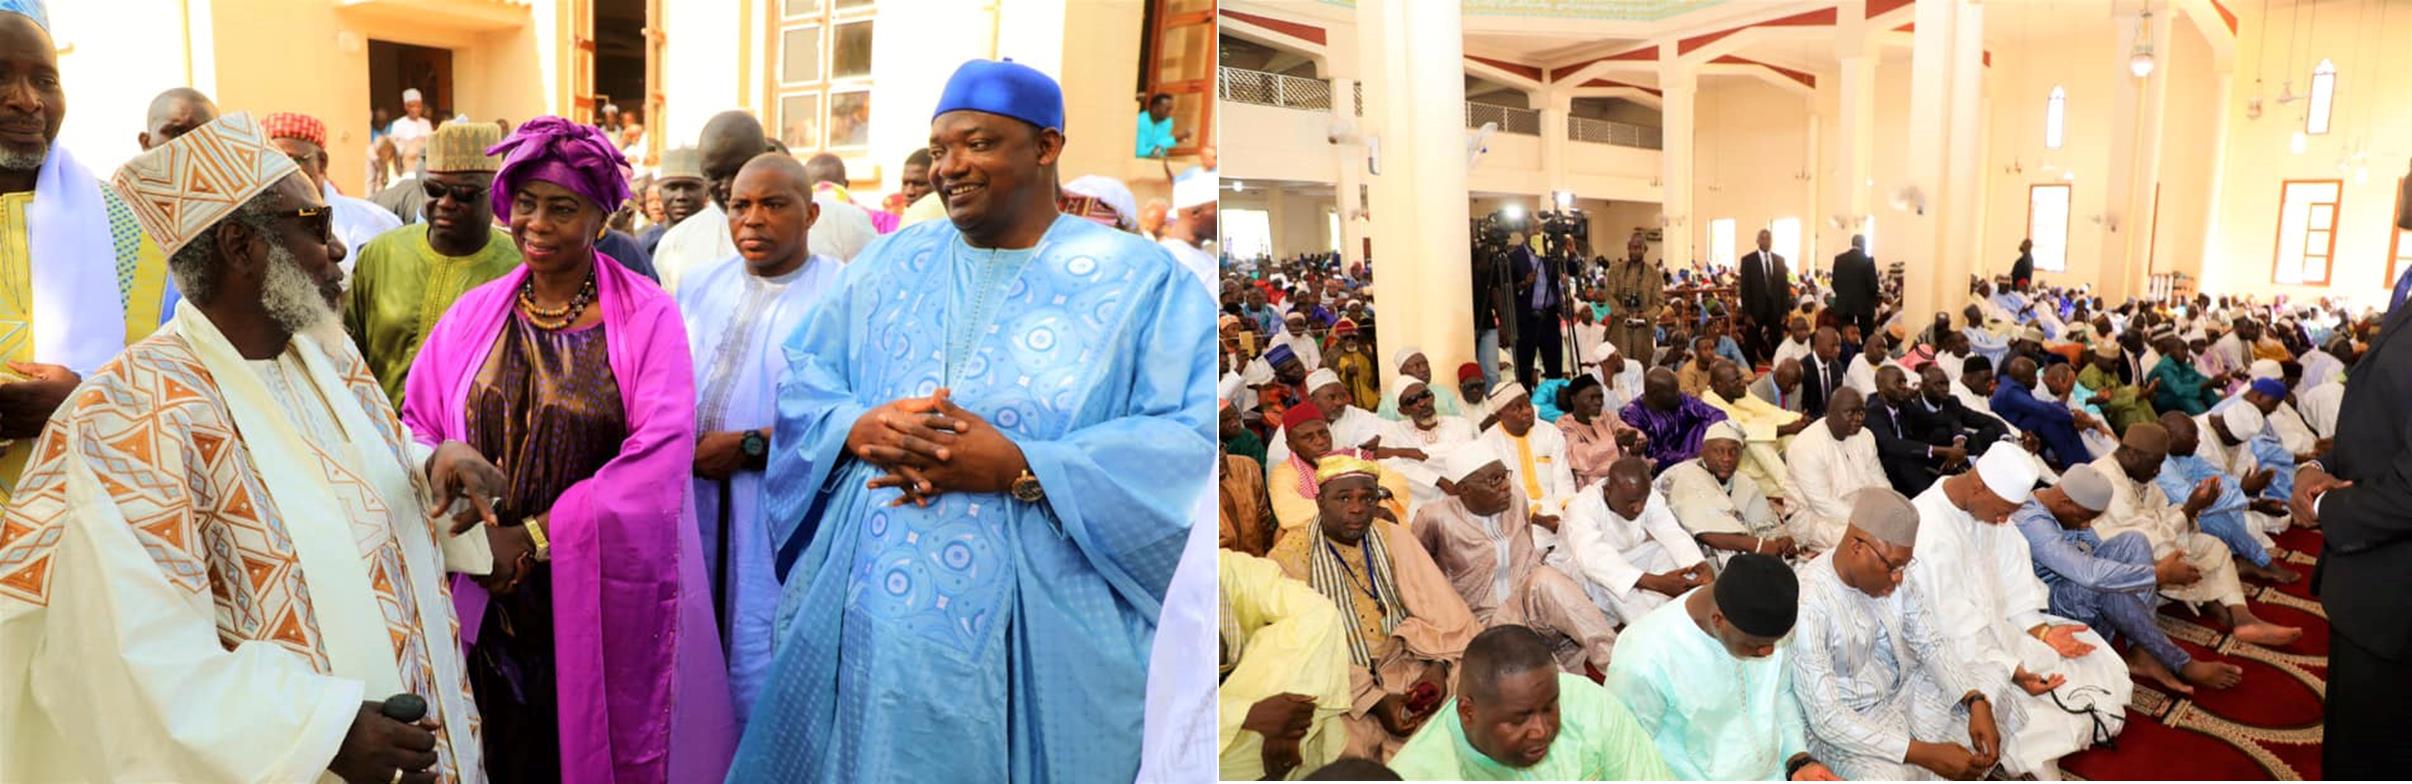 President Barrow Sunday morning joined hundreds of worshippers for the Eid prayers at the King Fahd Mosque in Banjul.